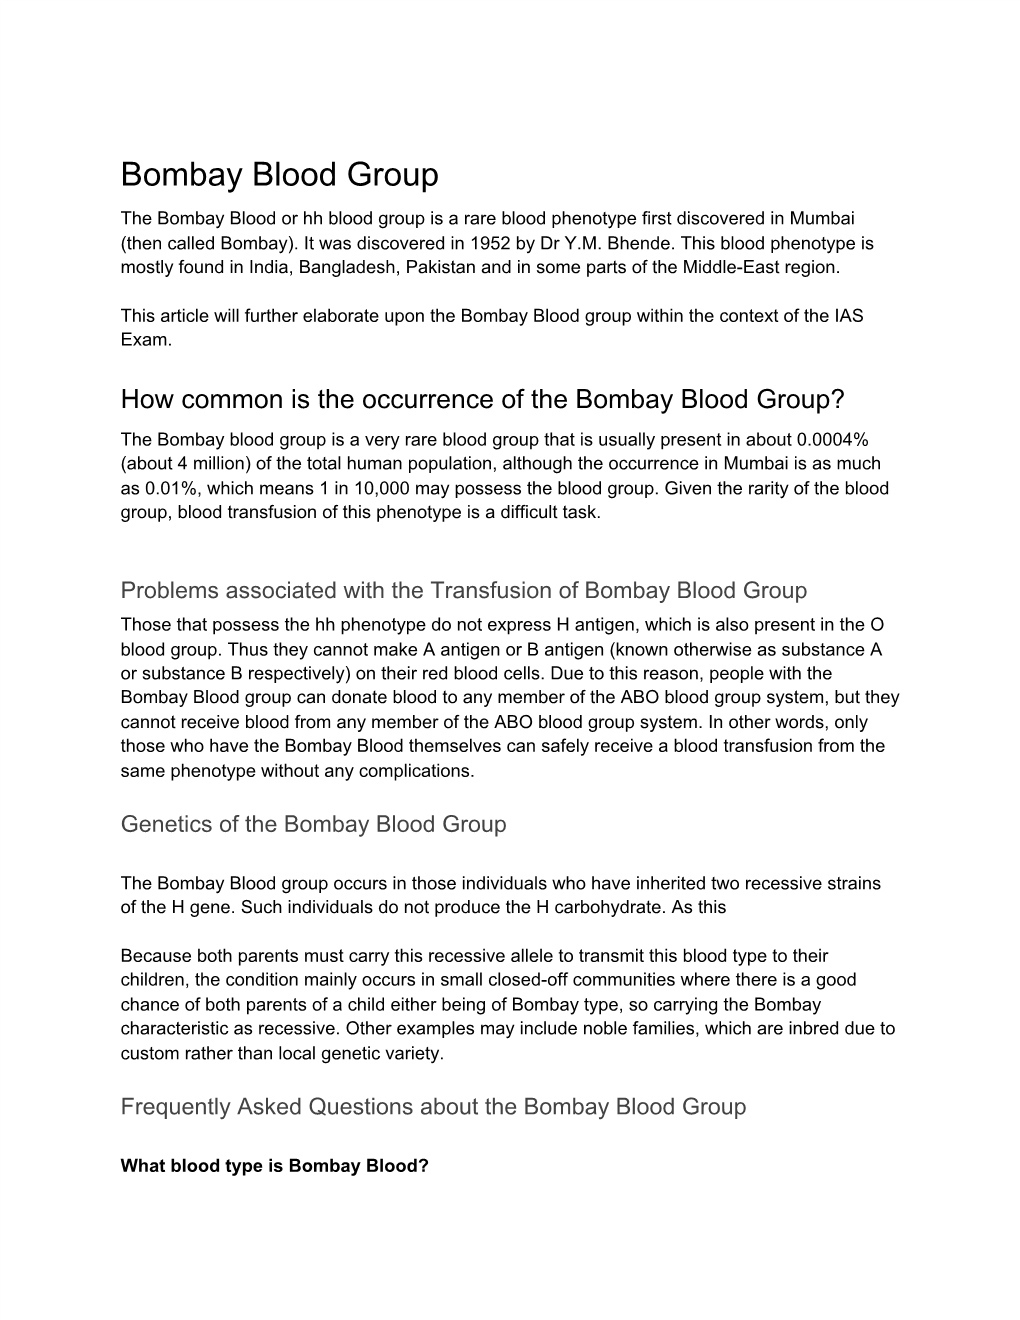 Bombay Blood Group the Bombay Blood Or Hh Blood Group Is a Rare Blood Phenotype First Discovered in Mumbai (Then Called Bombay)